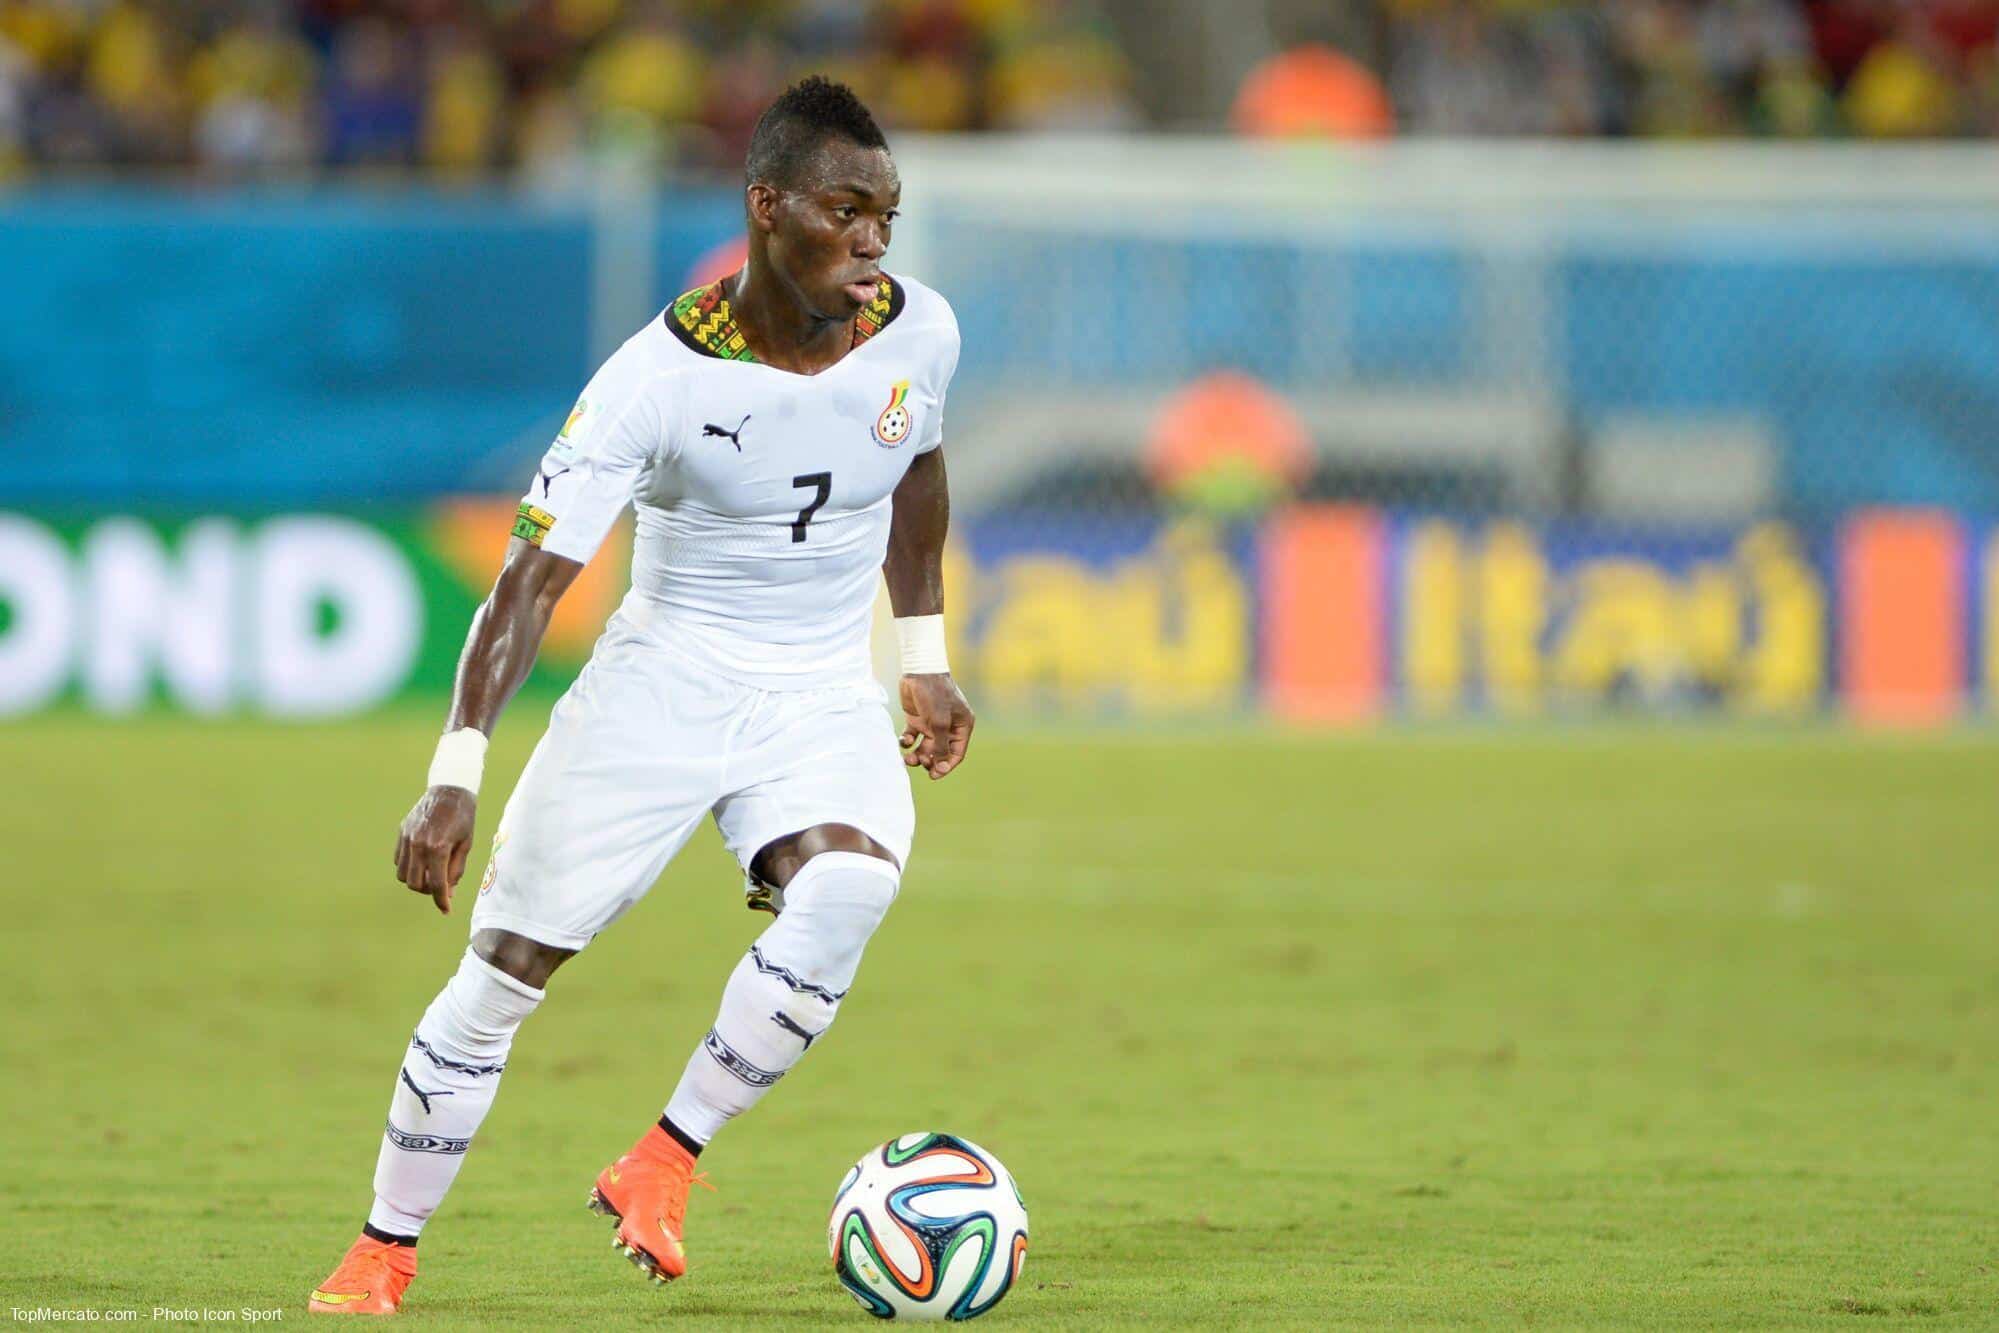 Christian Atsu: Late winger most talented player Ghana has seen since Abedi Pele - Karl Tufuoh